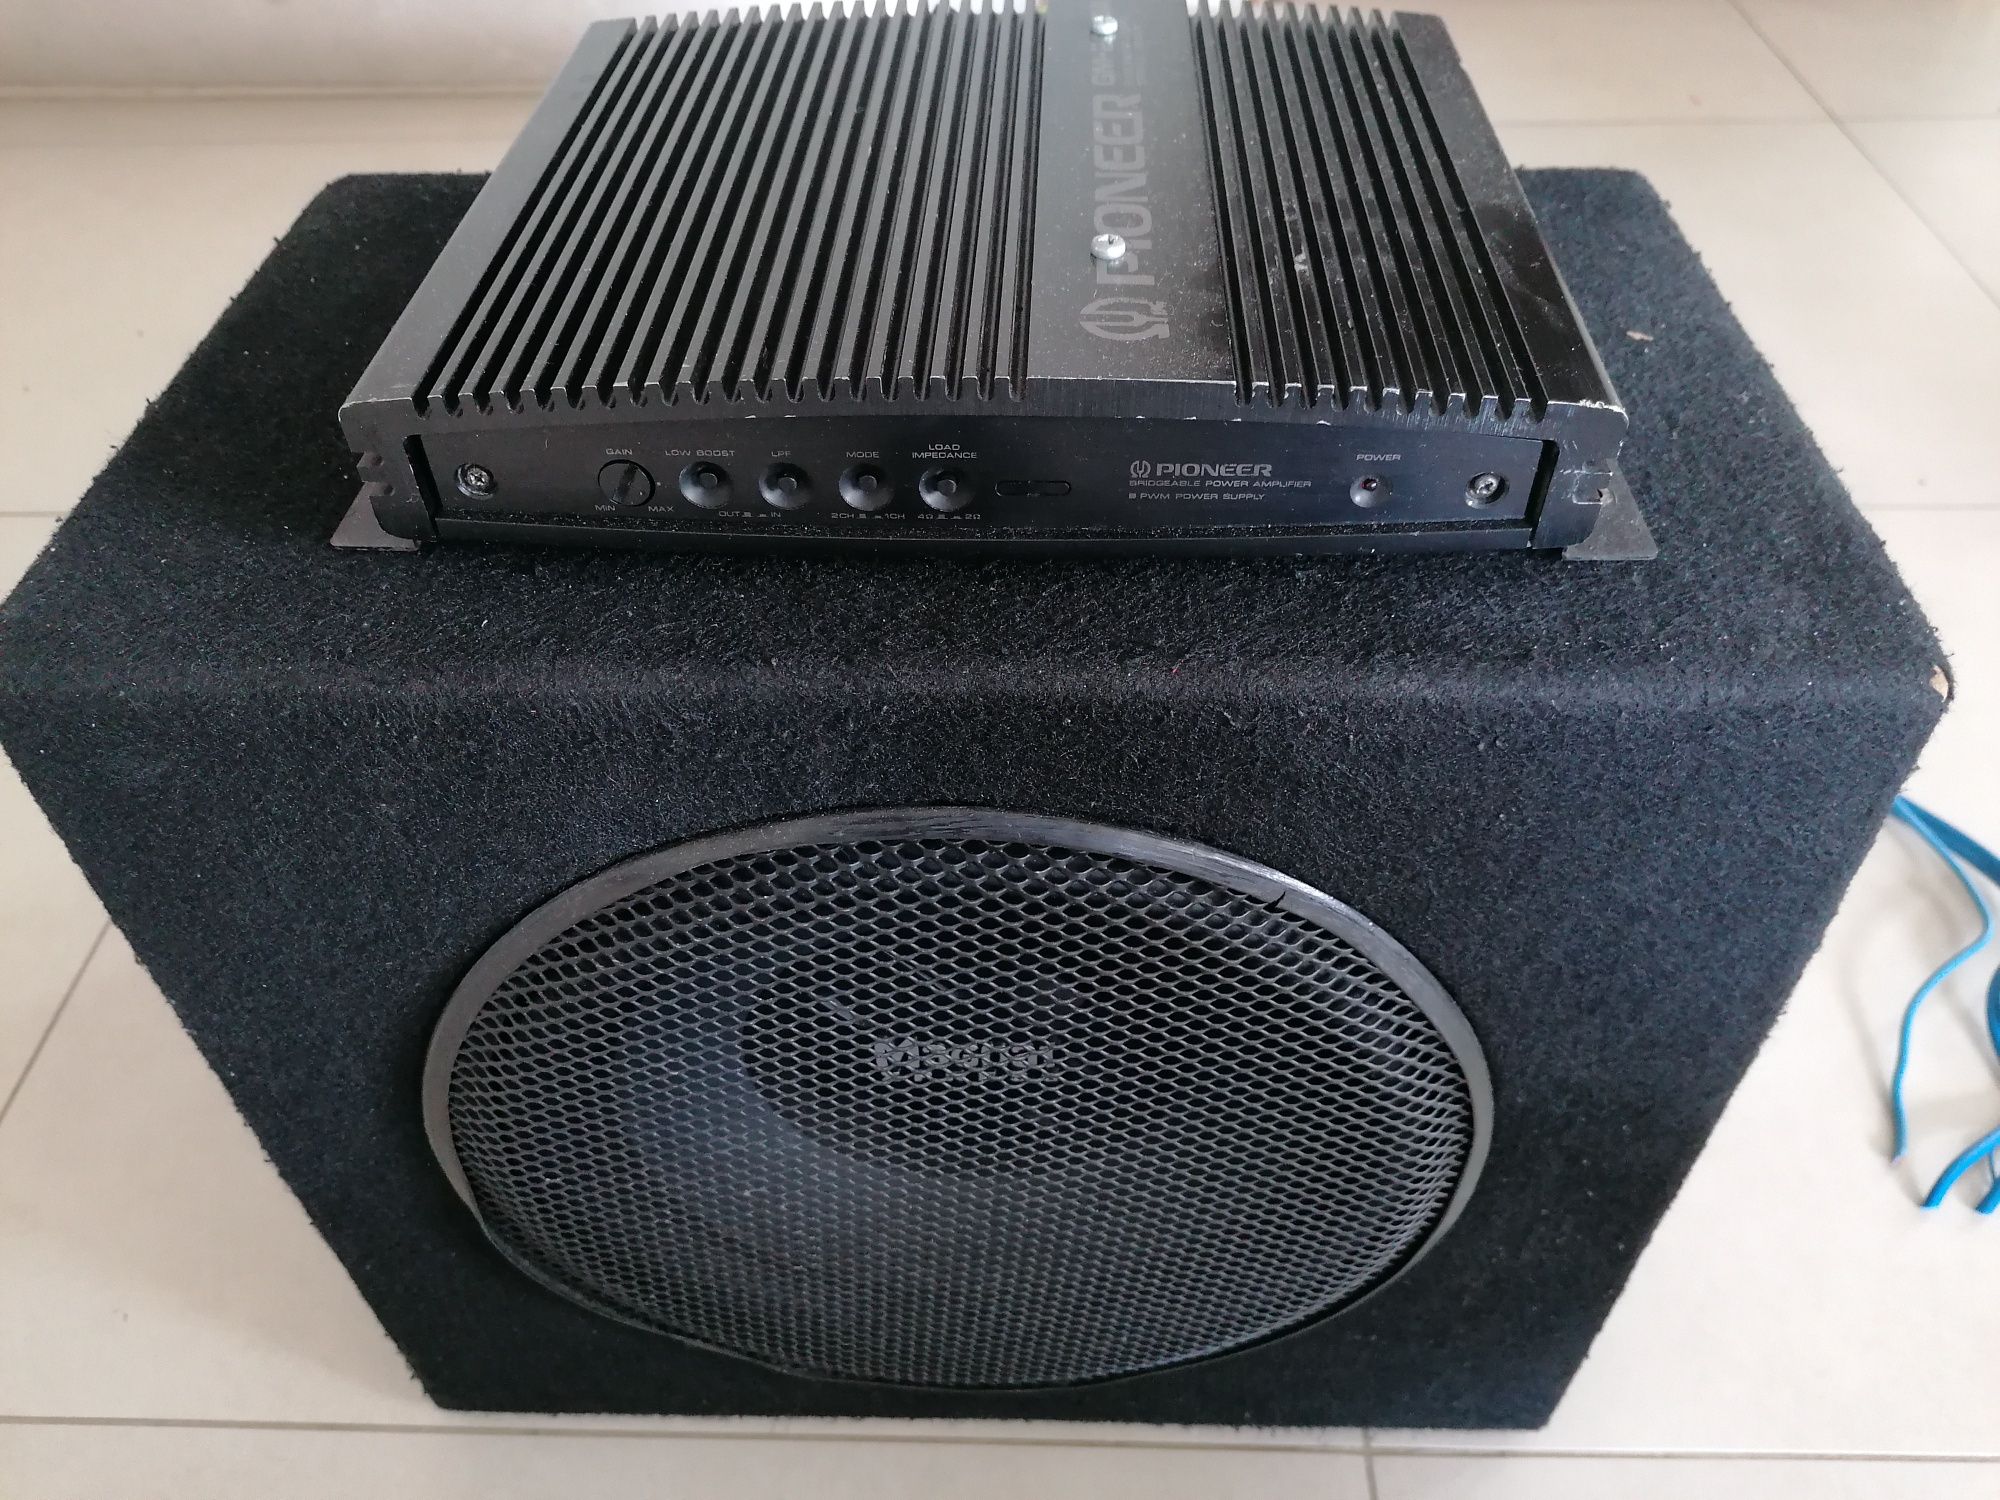 Subwoofer si amplificator statie auto Magnat Pioneer 200W RMS